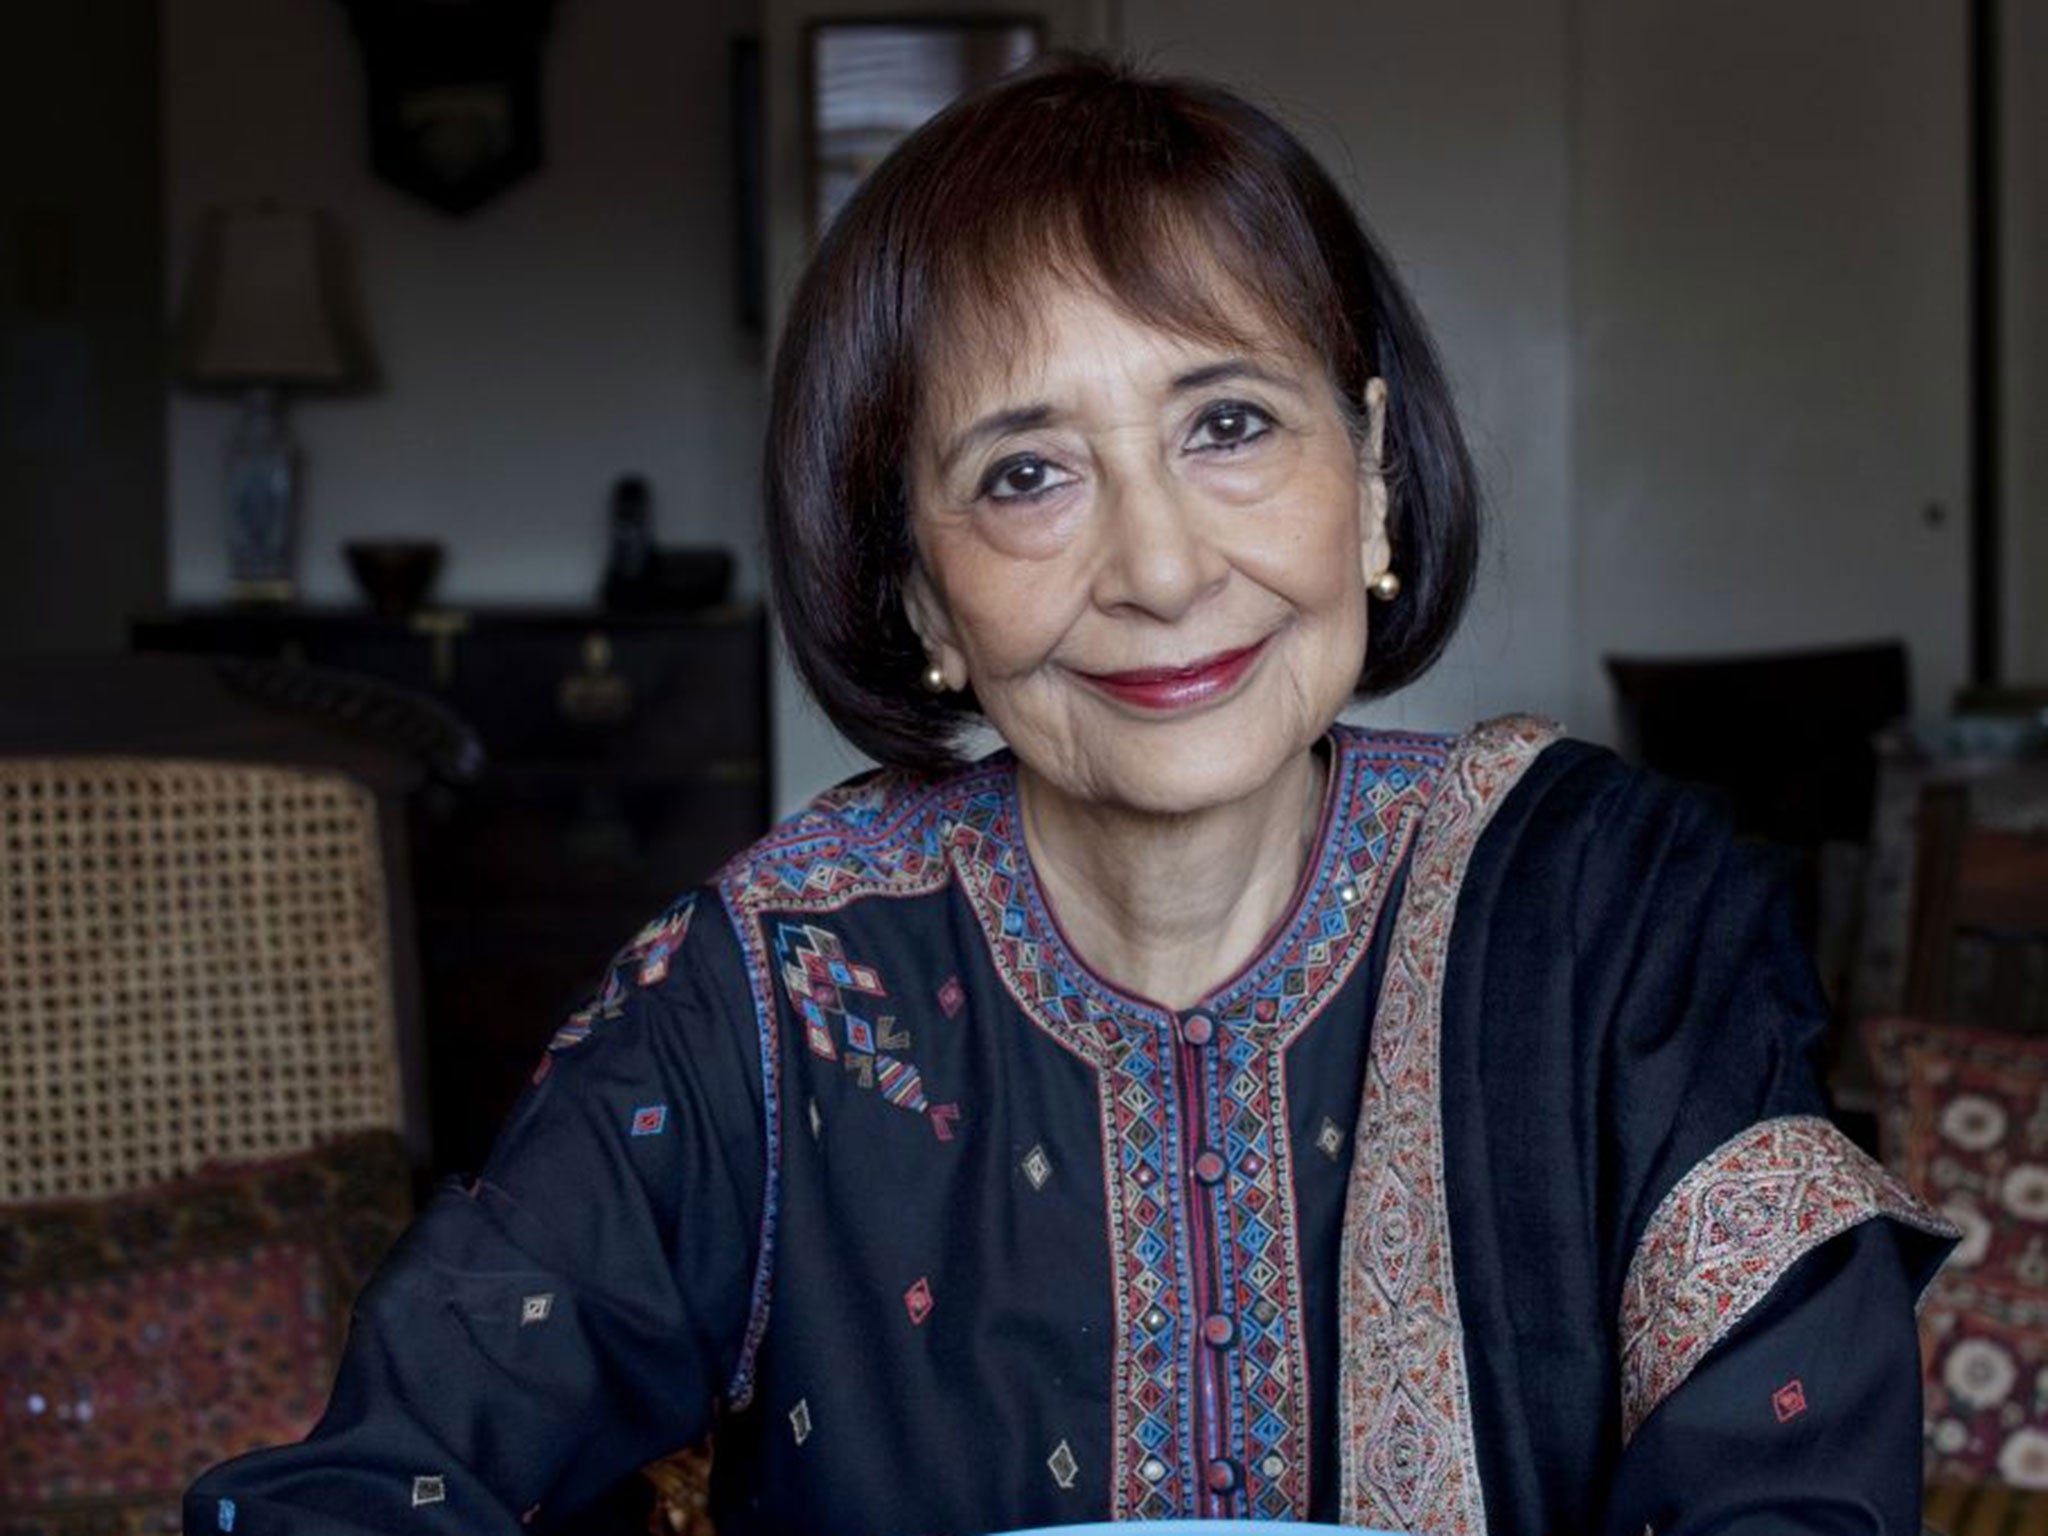 Madhur Jaffrey is about to launch Curry Easy Vegetarian